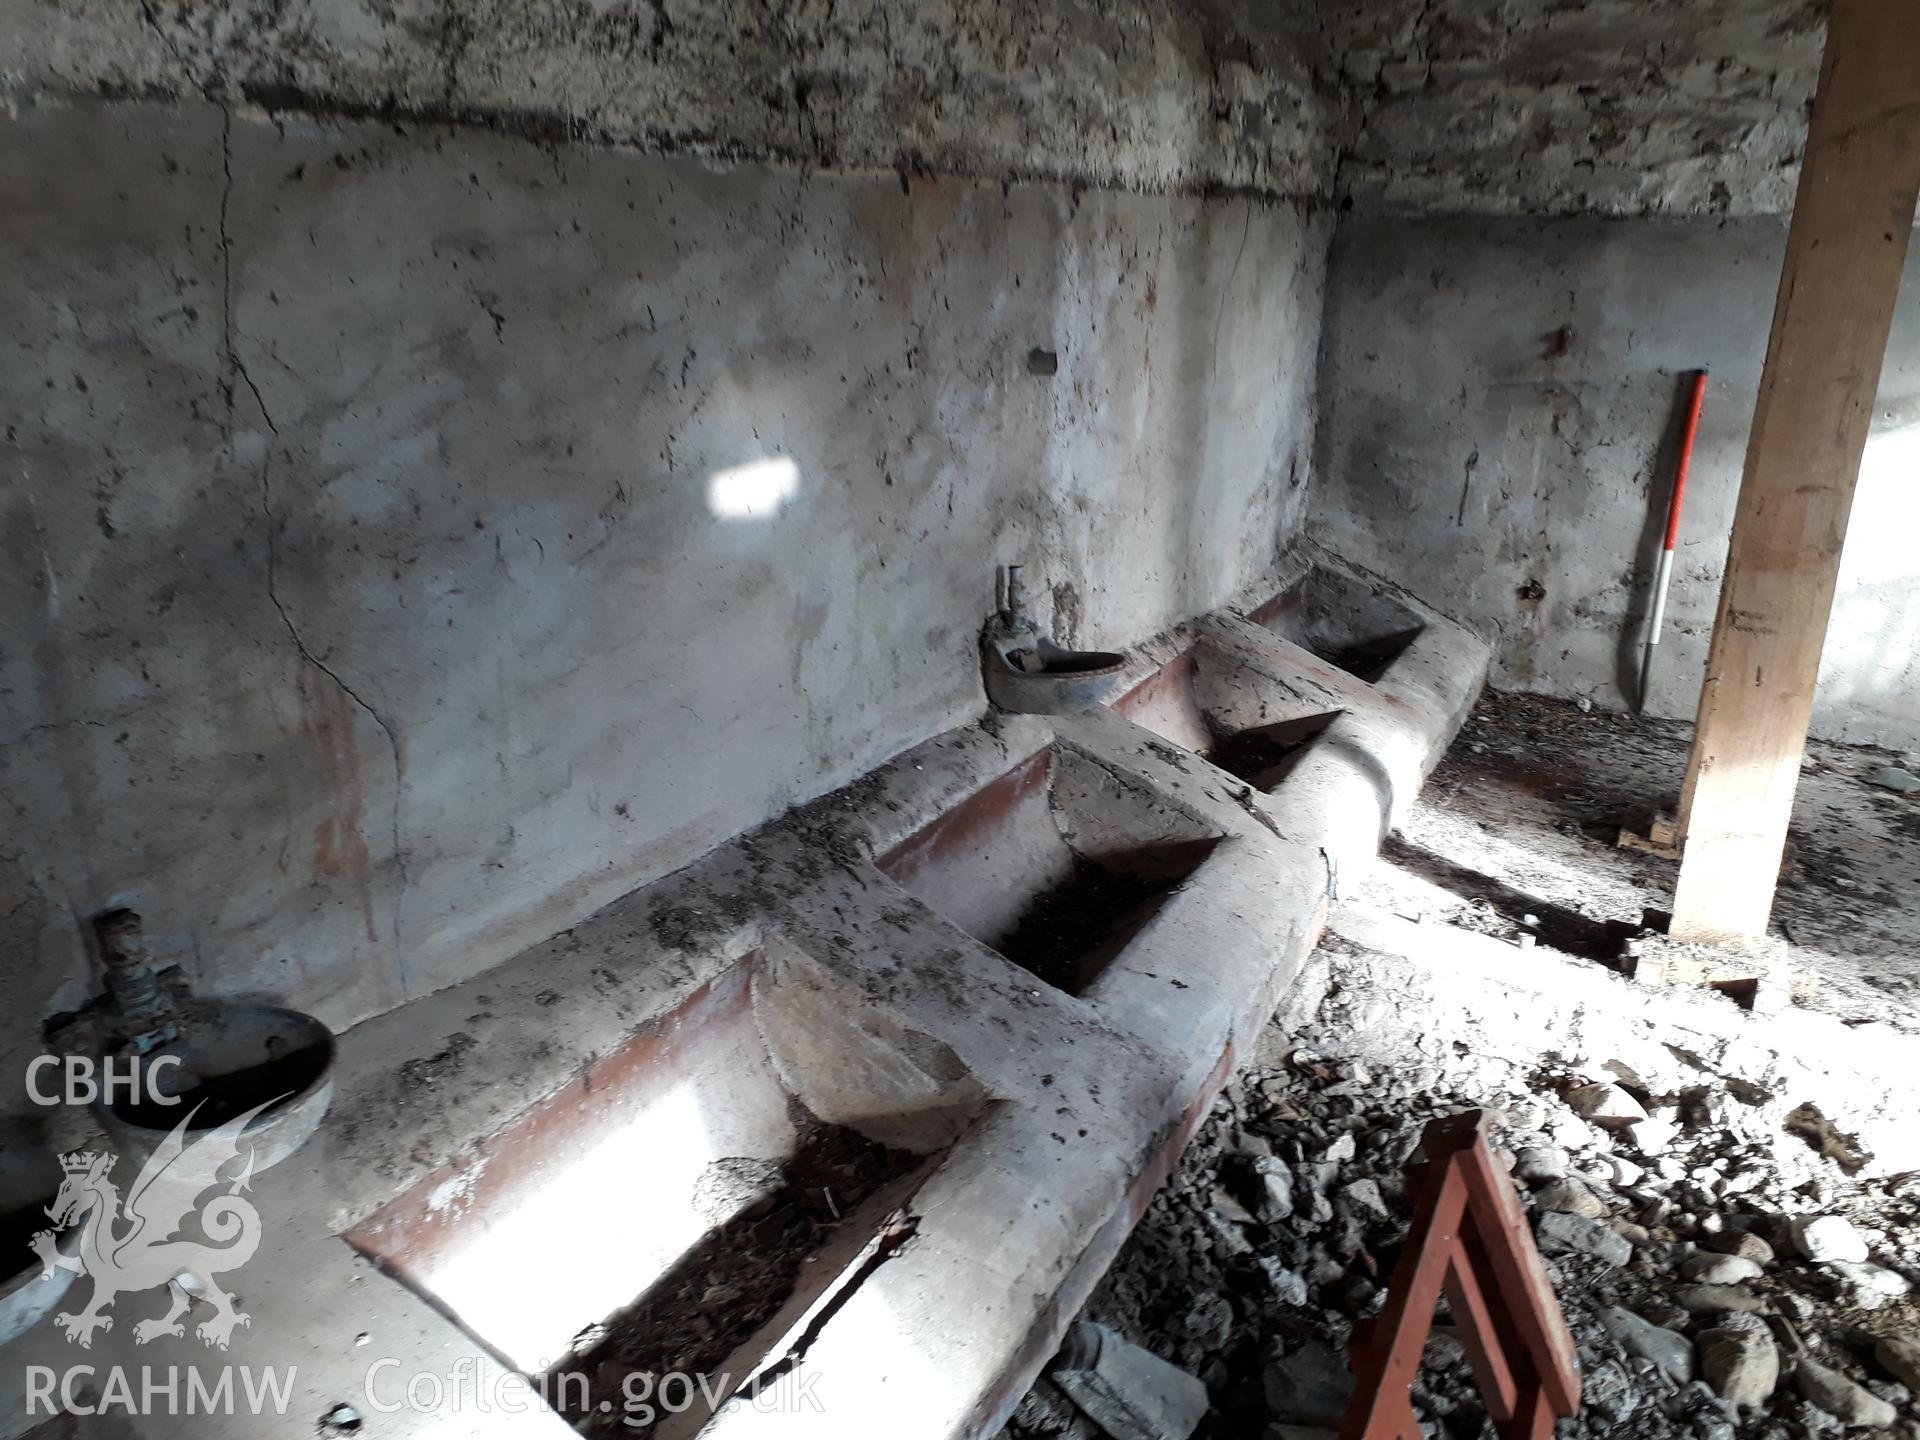 Barn interior view north-east, modern animal troughs. 1m scale. Photographed as part of archaeological building recording conducted at Bryn Ysguboriau, Llanelidan, Denbighshire, carried out by Archaeology Wales, 2018. Project no. P2587.